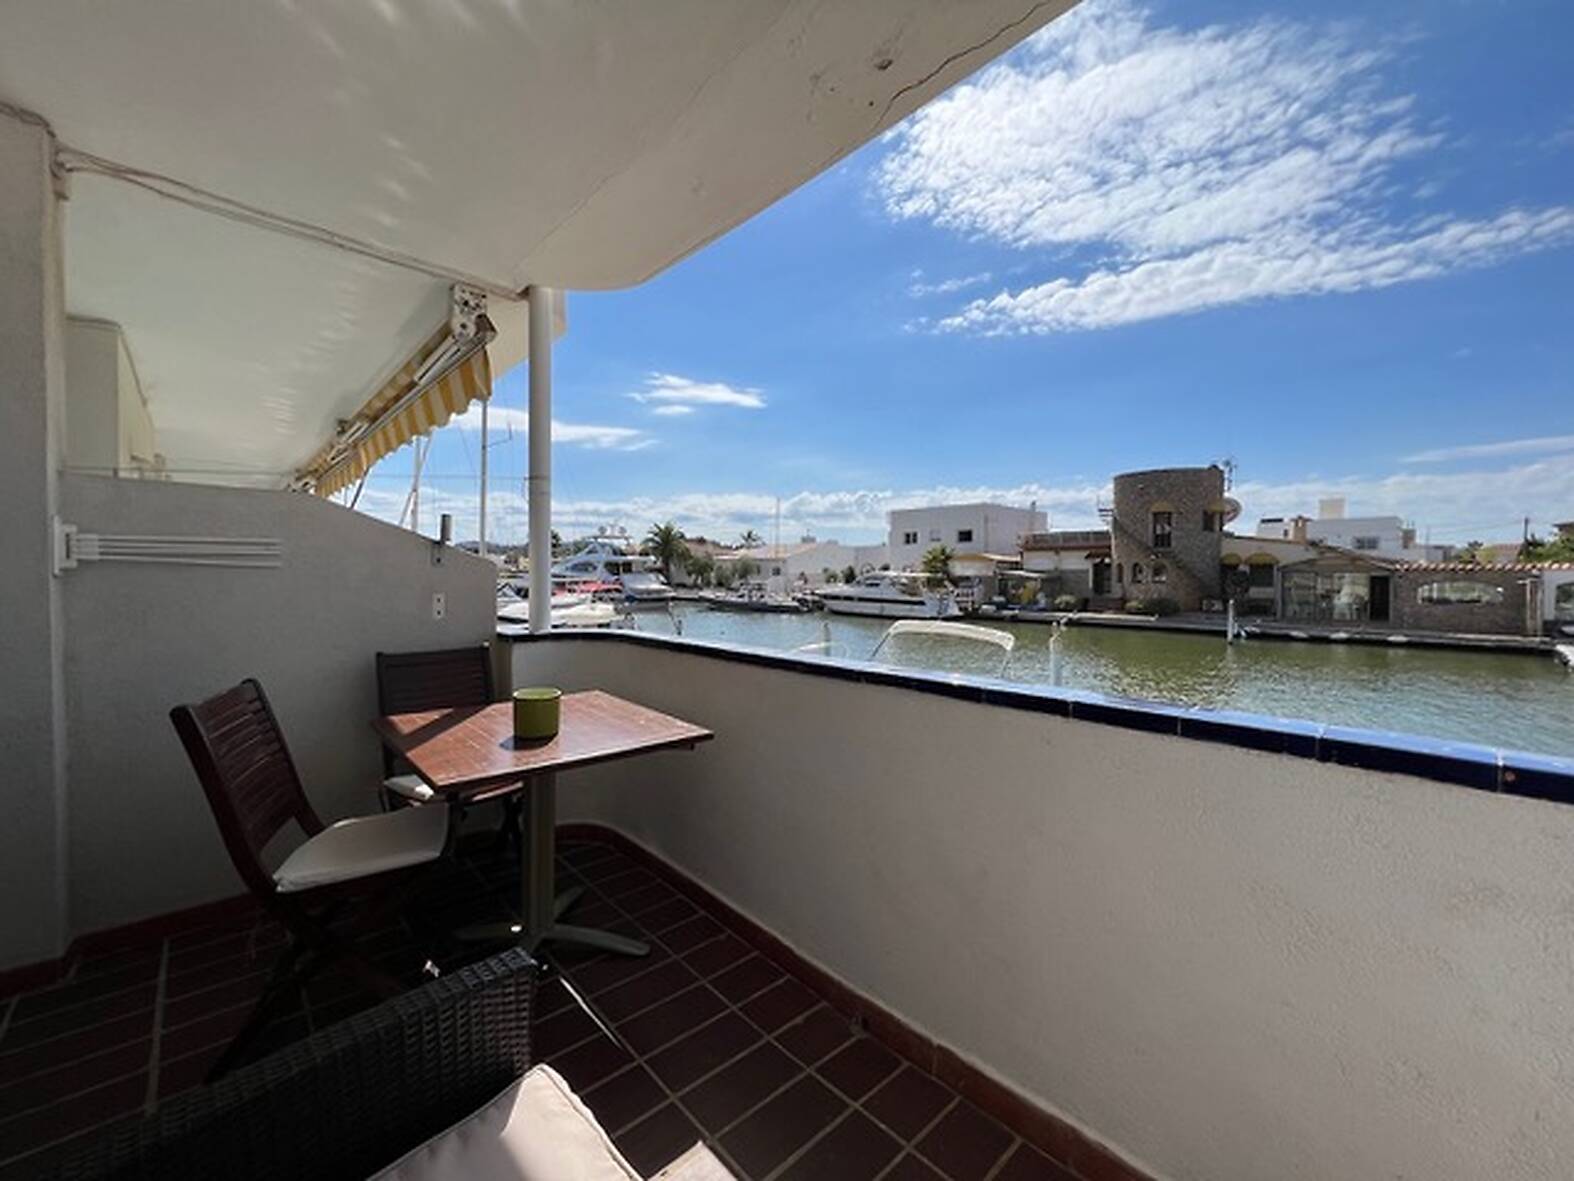 Apartment with canal views for sale in Rosas - Santa Margarita